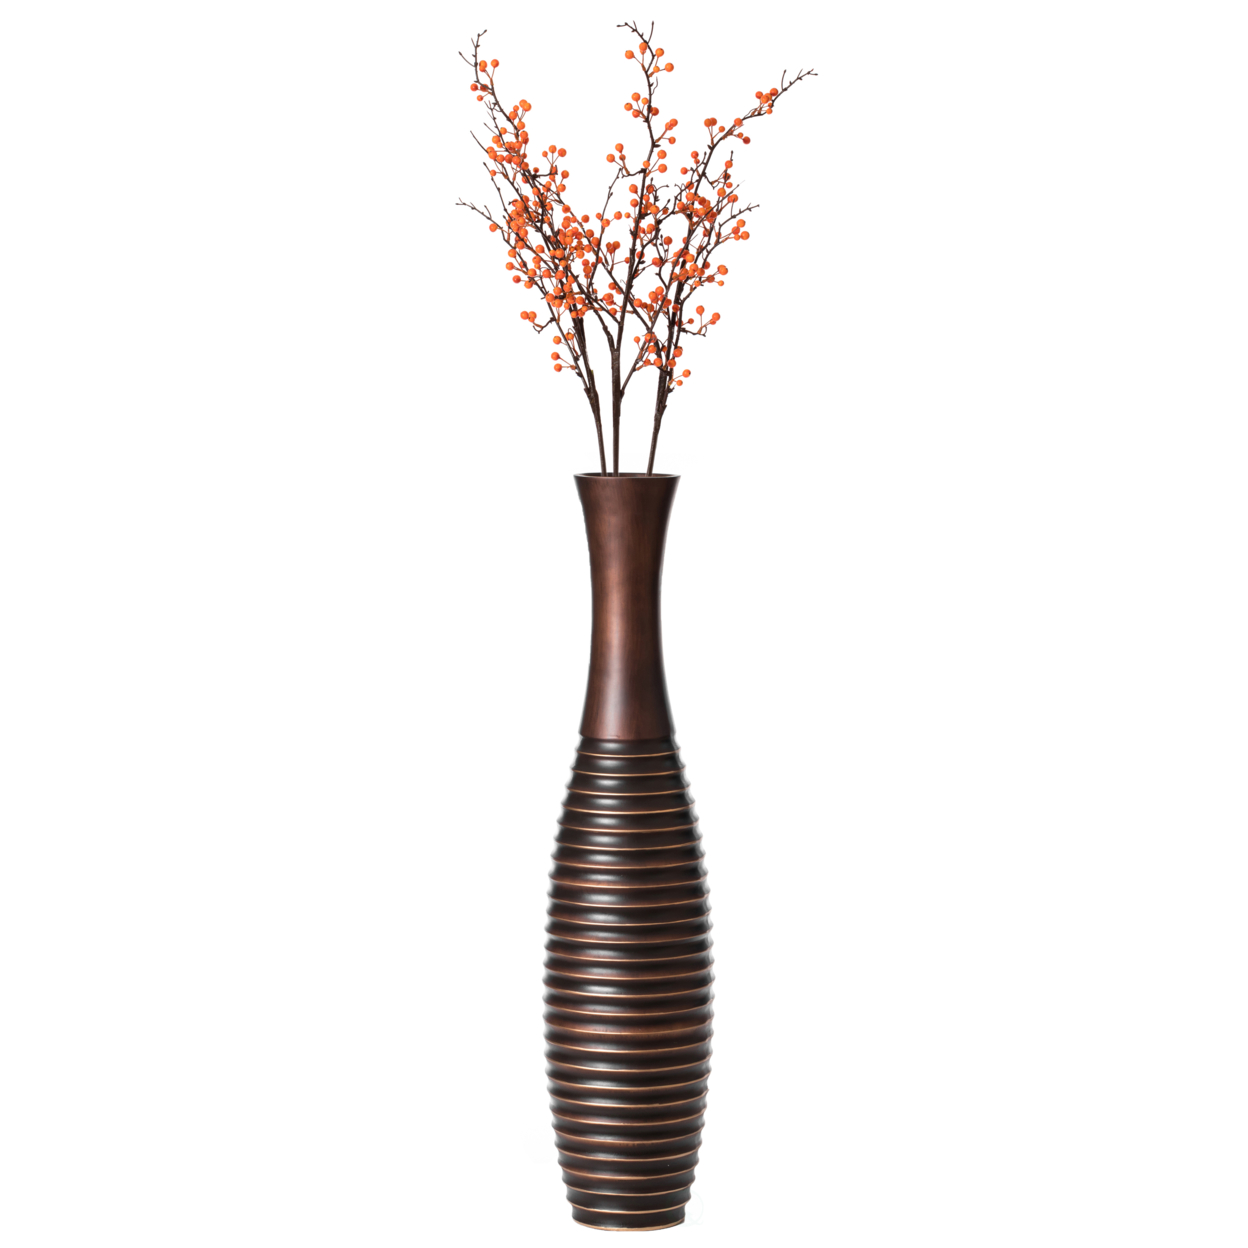 Decorative Conemporary Tall Trumpet Shape Floor Vase, Brown - Large